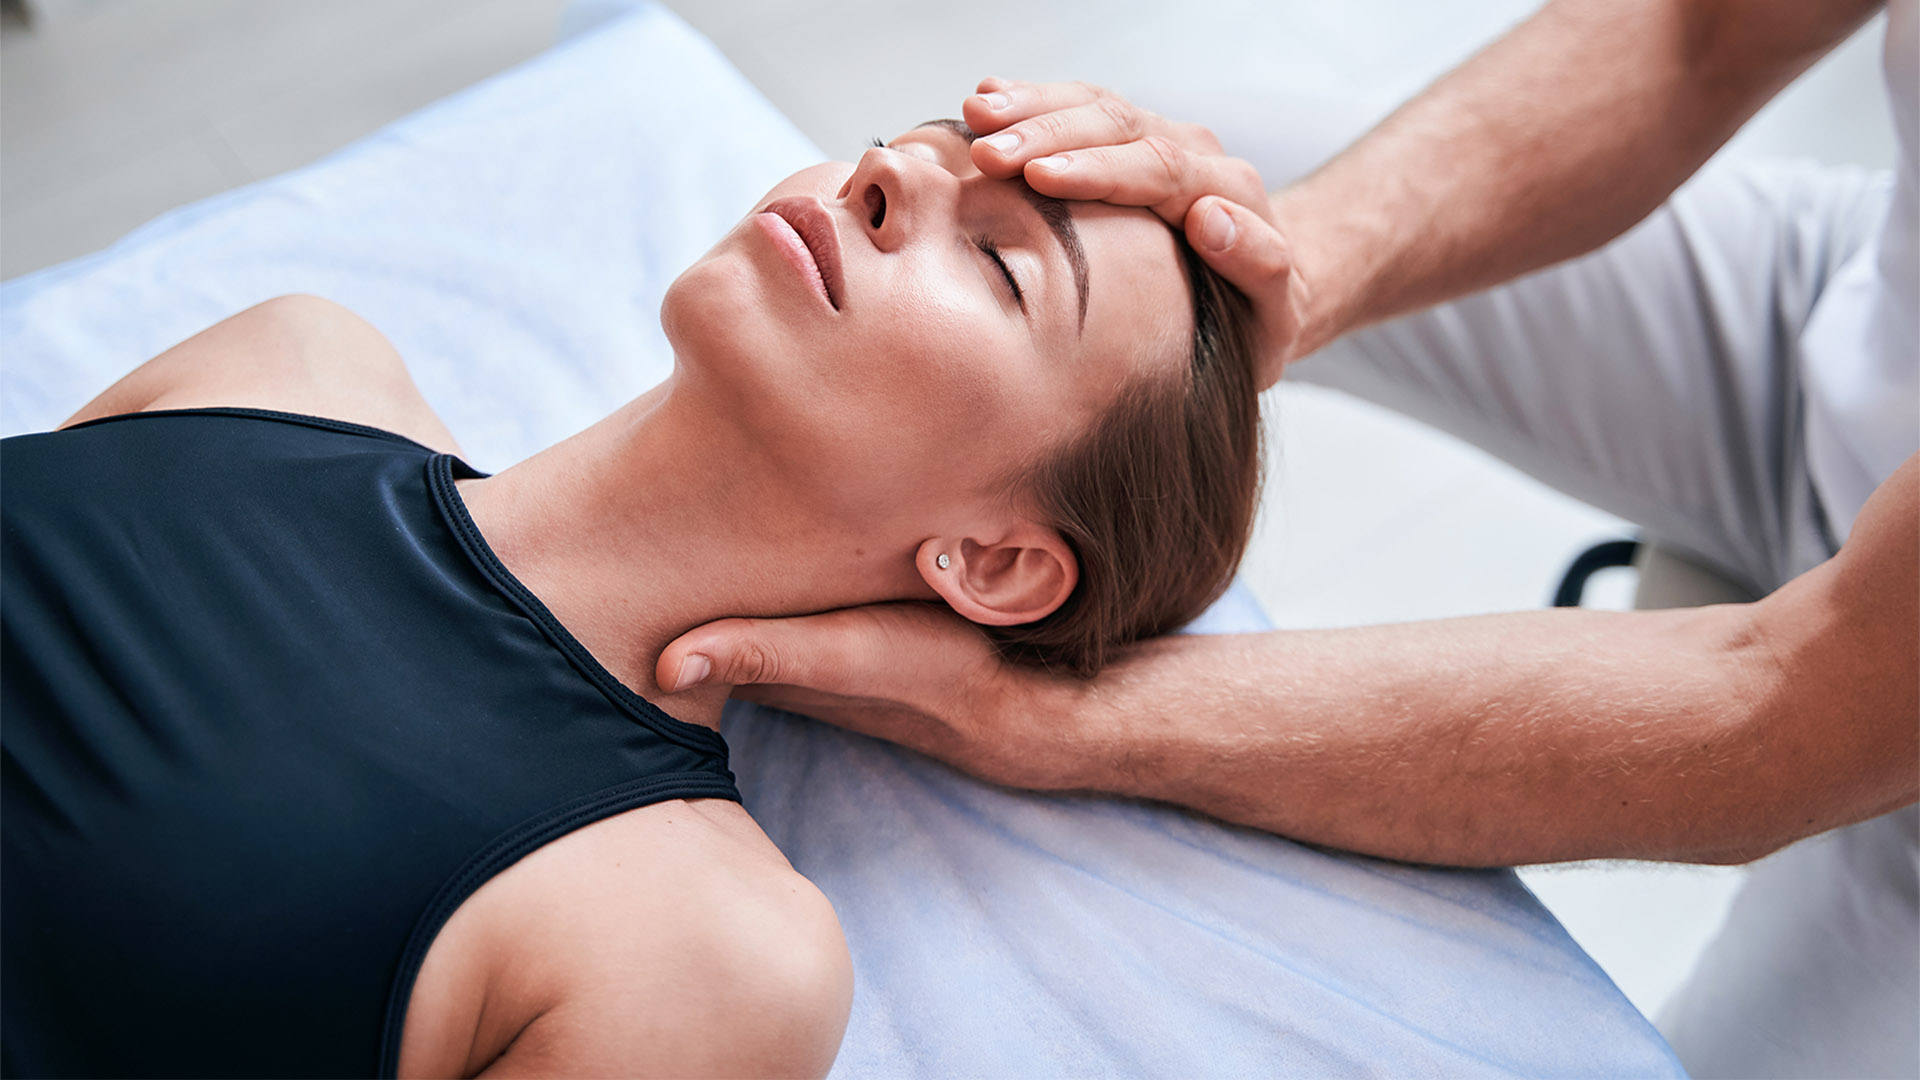 Neck pain and shoulder pain stretches and massage techniques